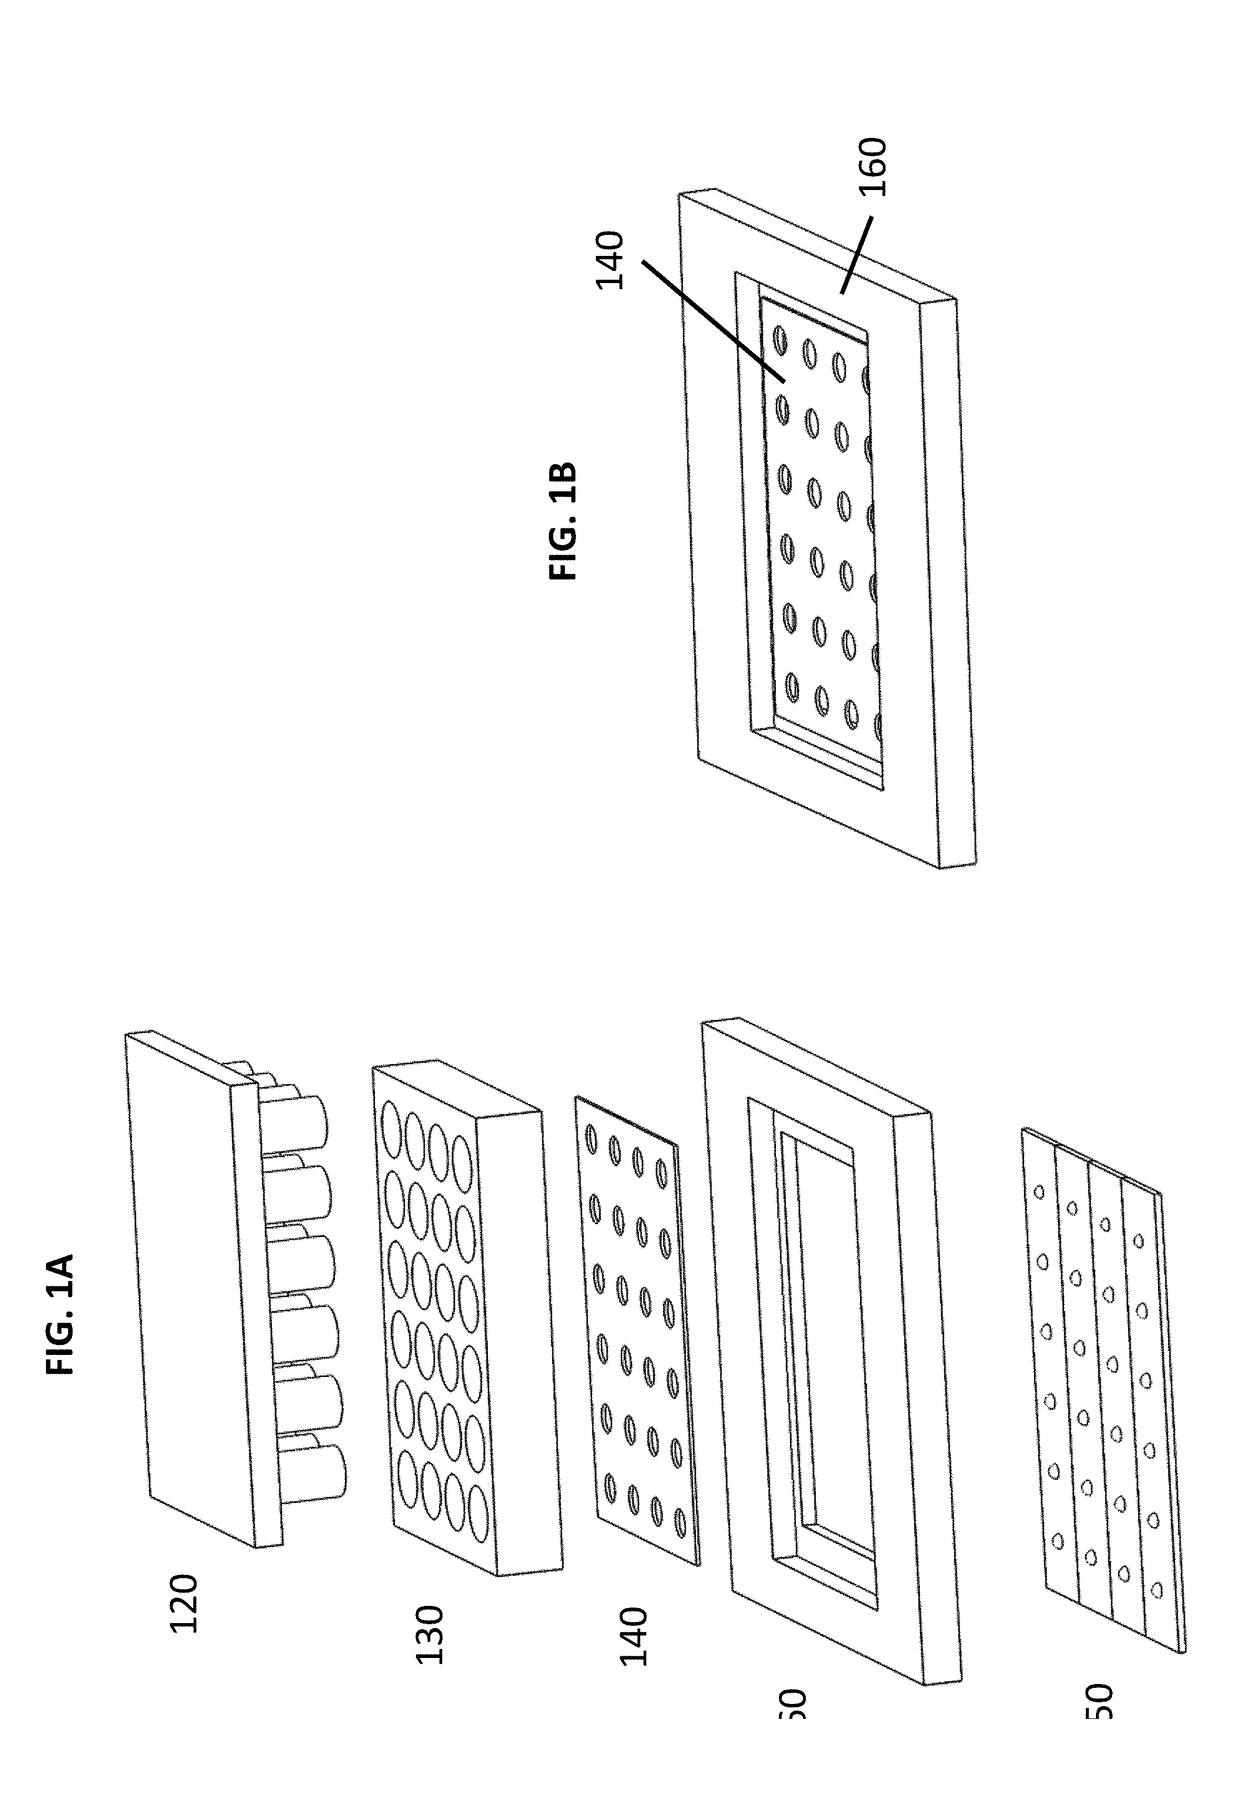 Apparatus for patterning hydrogels  into multi-well plates